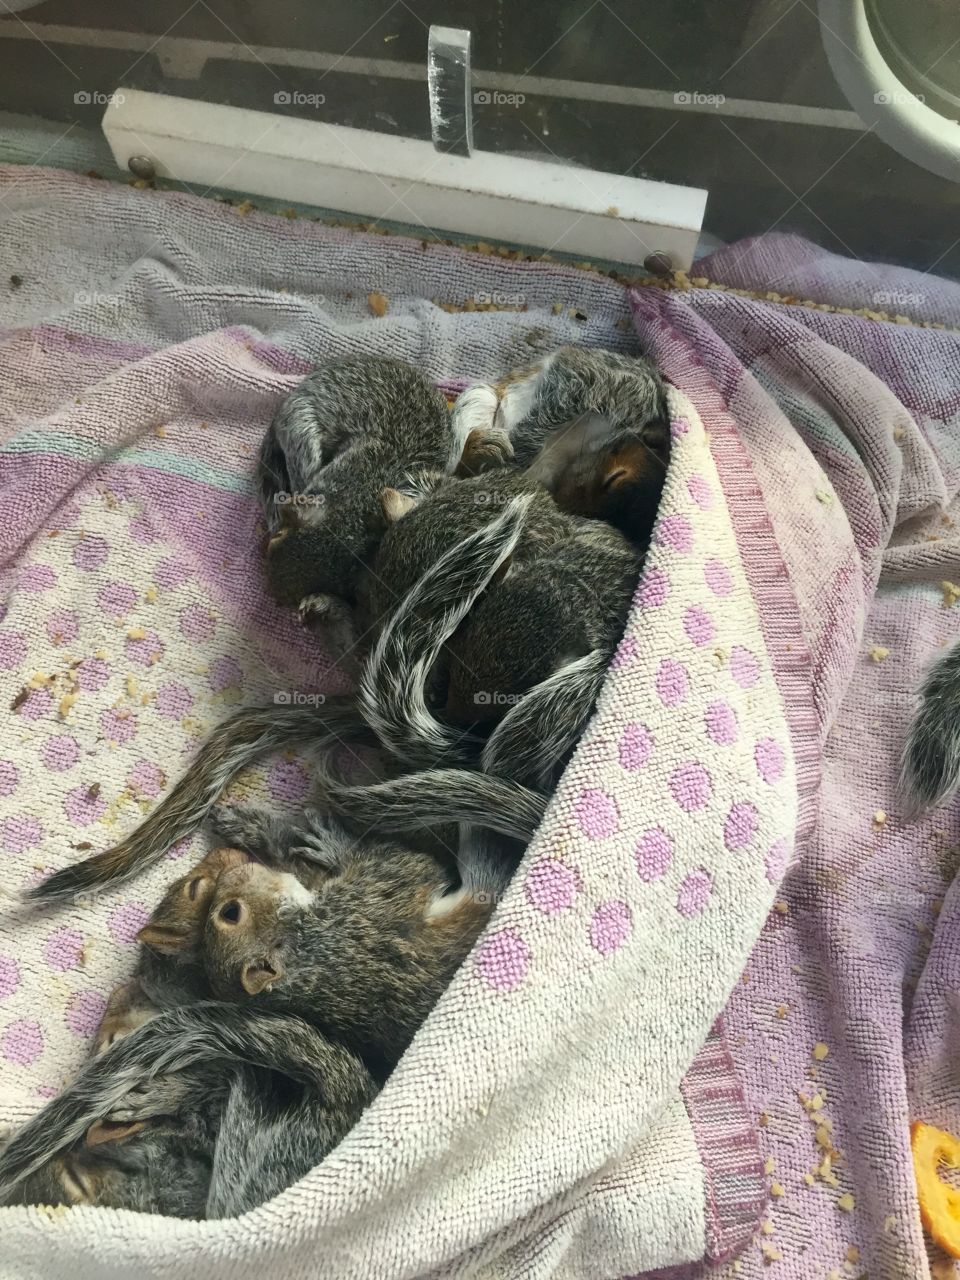 Baby squirrels in the incubator at the Aark wildlife rehab